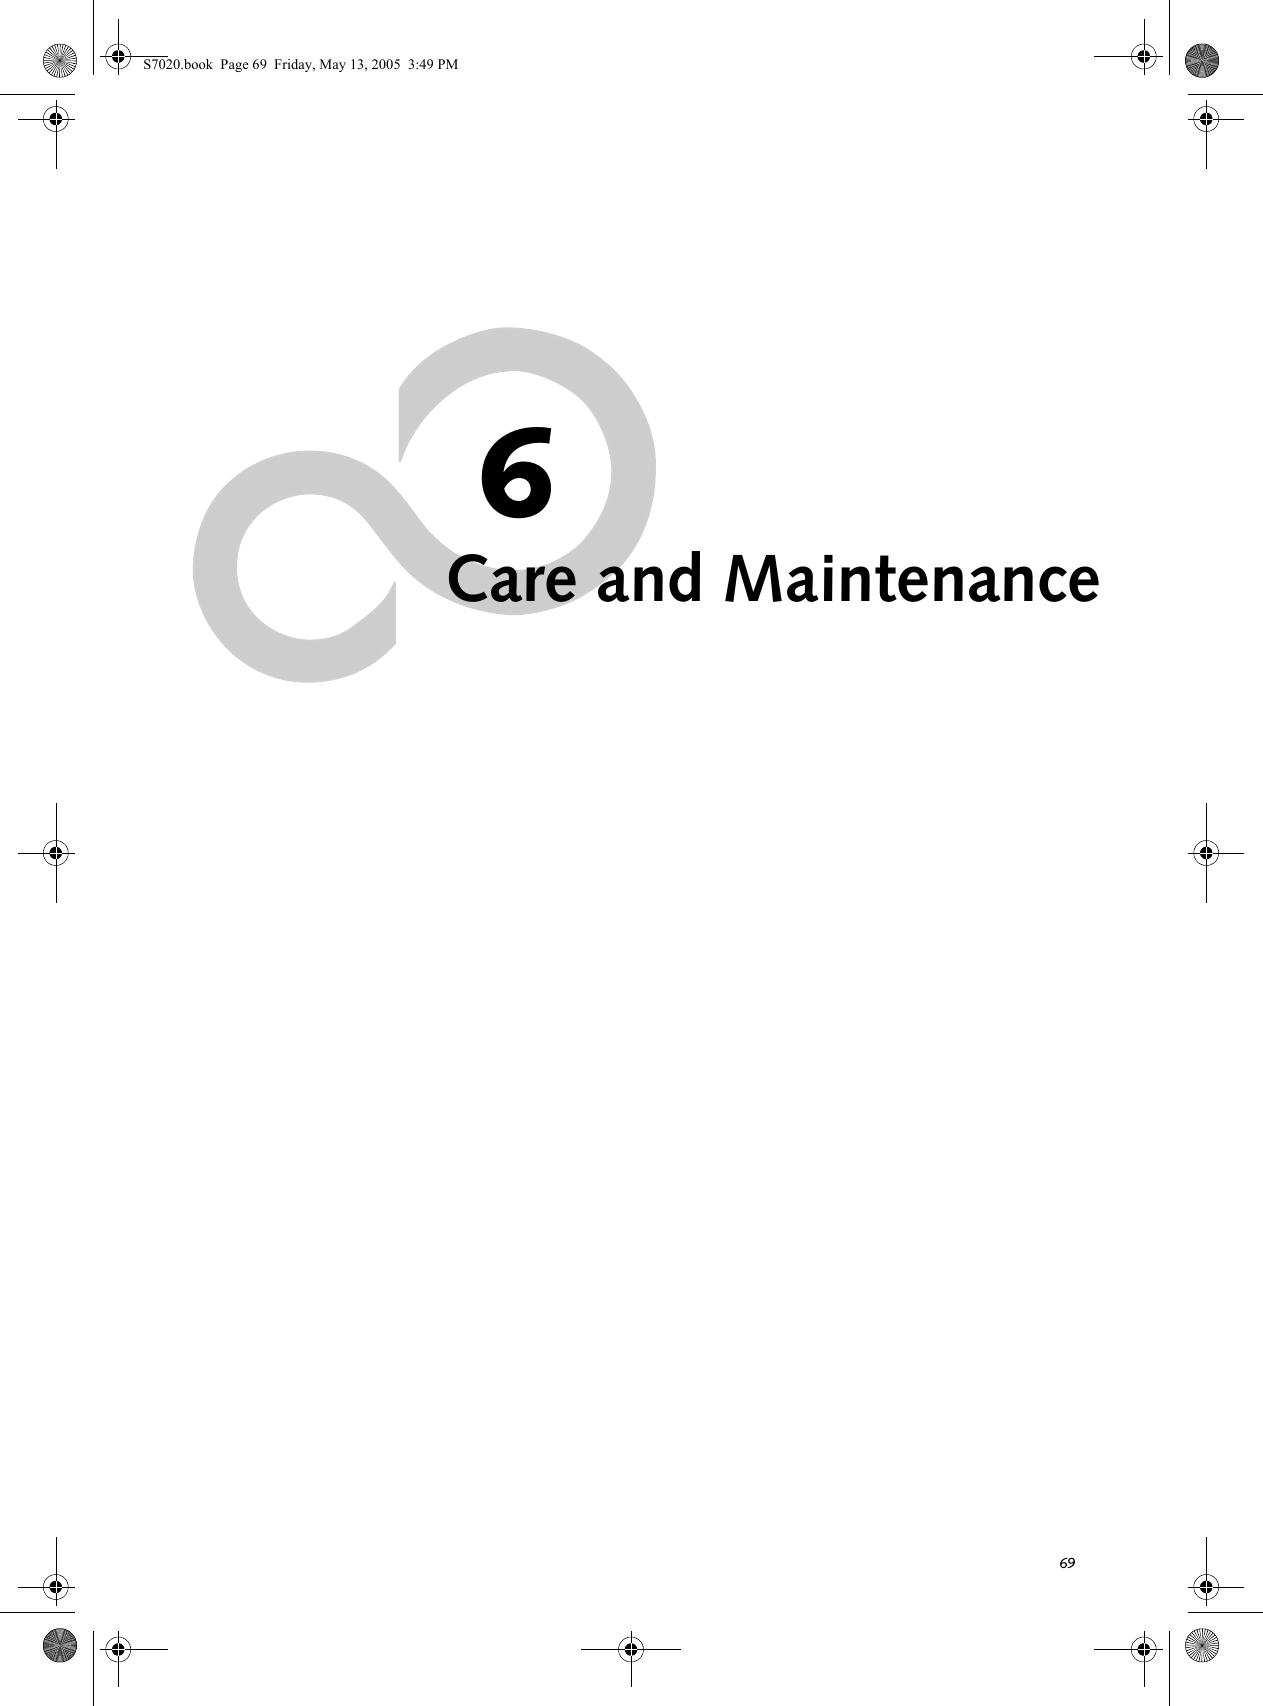 696Care and MaintenanceS7020.book  Page 69  Friday, May 13, 2005  3:49 PM